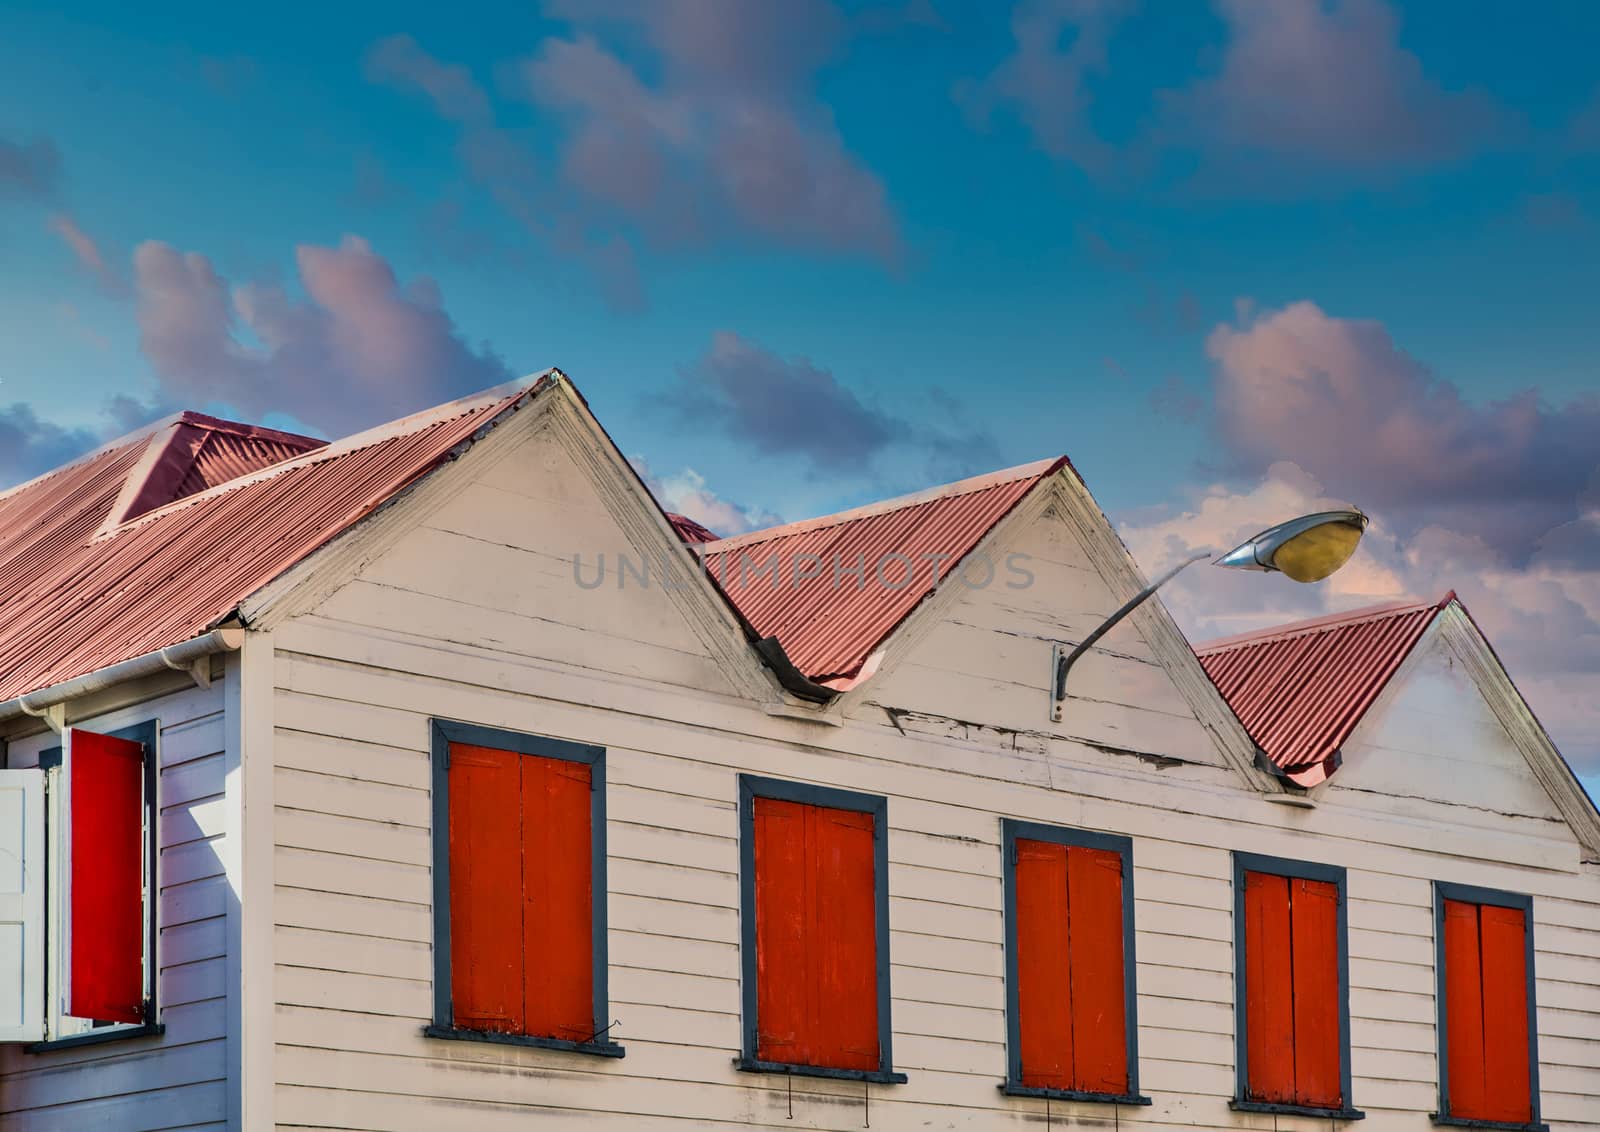 Red Shutters and Roof at Dusk by dbvirago